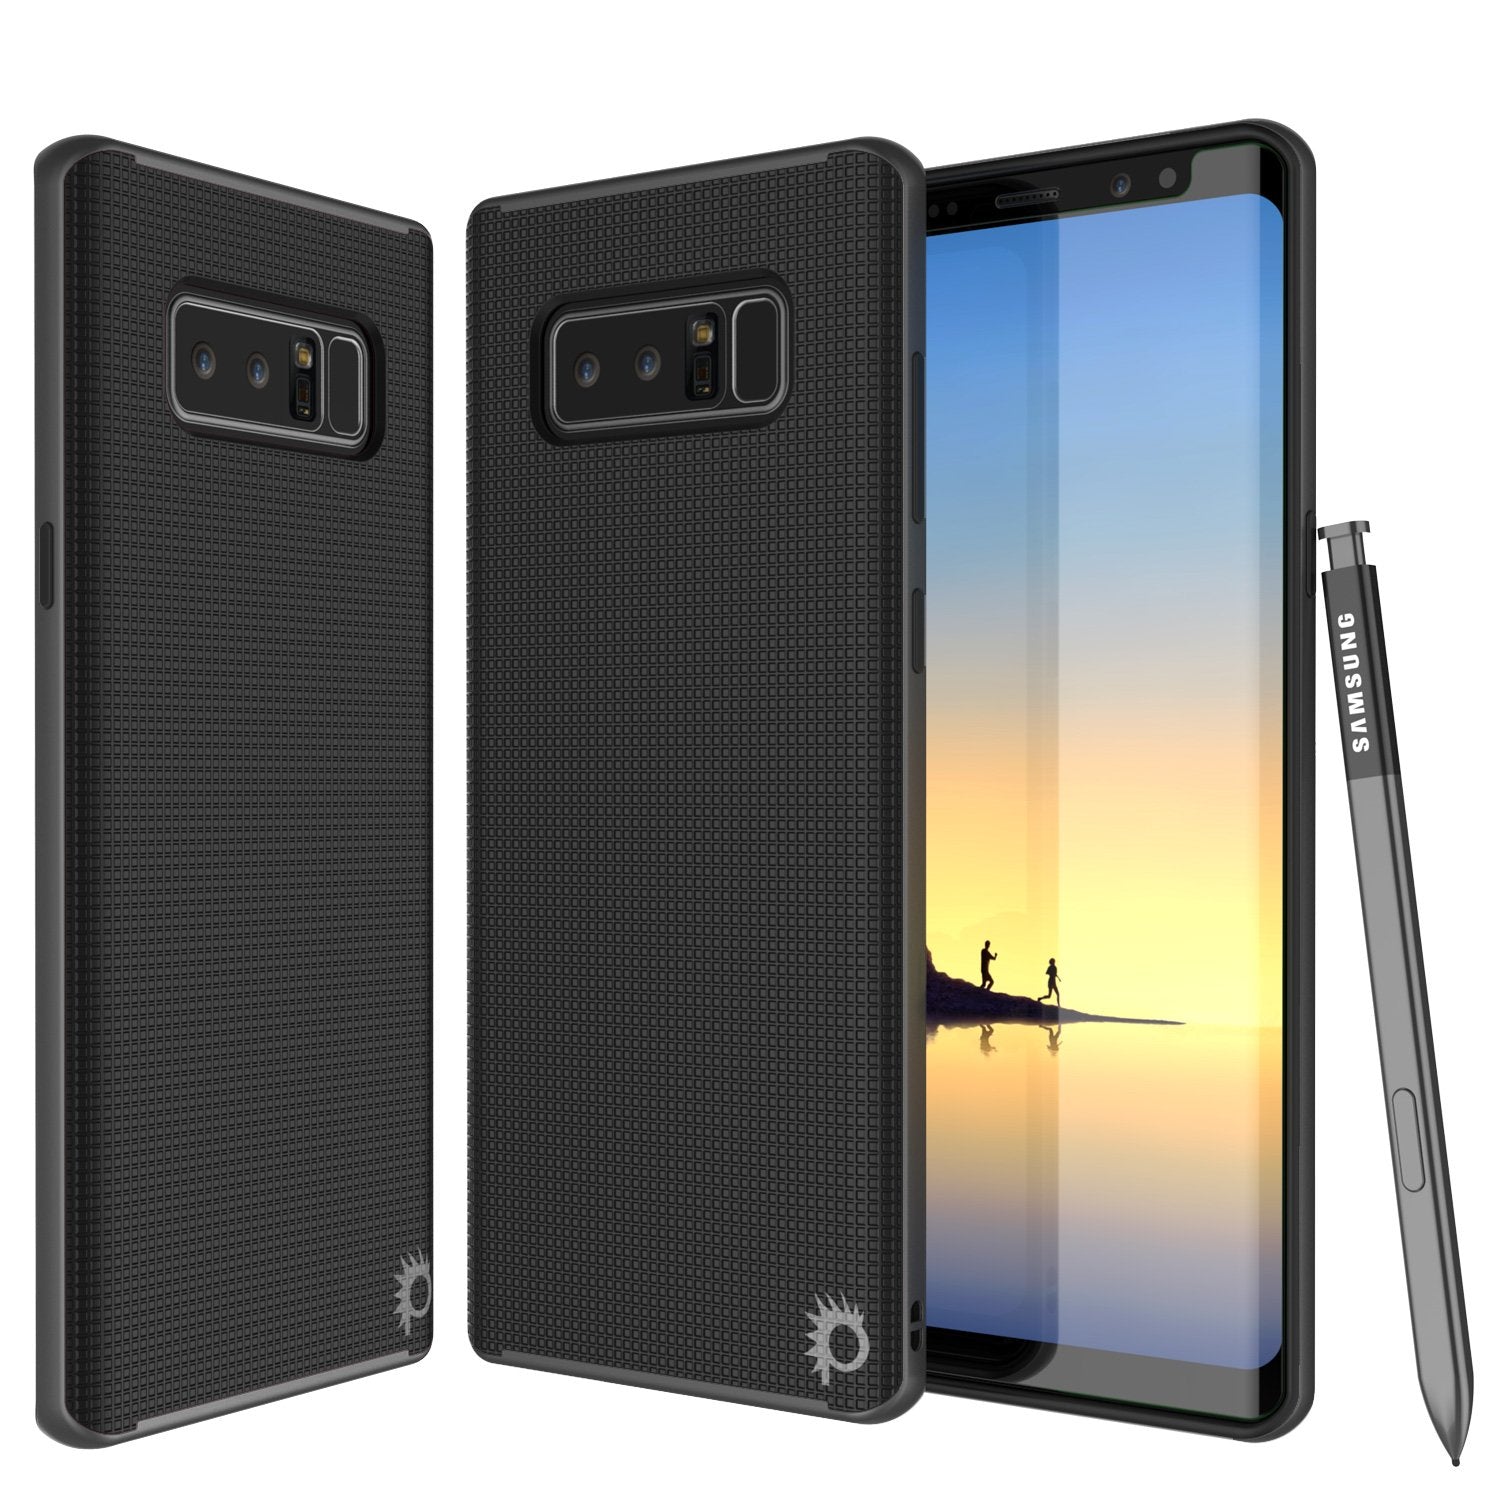 Galaxy Note 8 Case, PunkCase [Stealth Series] Hybrid 3-Piece Shockproof Dual Layer Cover [Non-Slip] [Soft TPU + PC Bumper] with PUNKSHIELD Screen Protector for Samsung Note 8 [Grey]